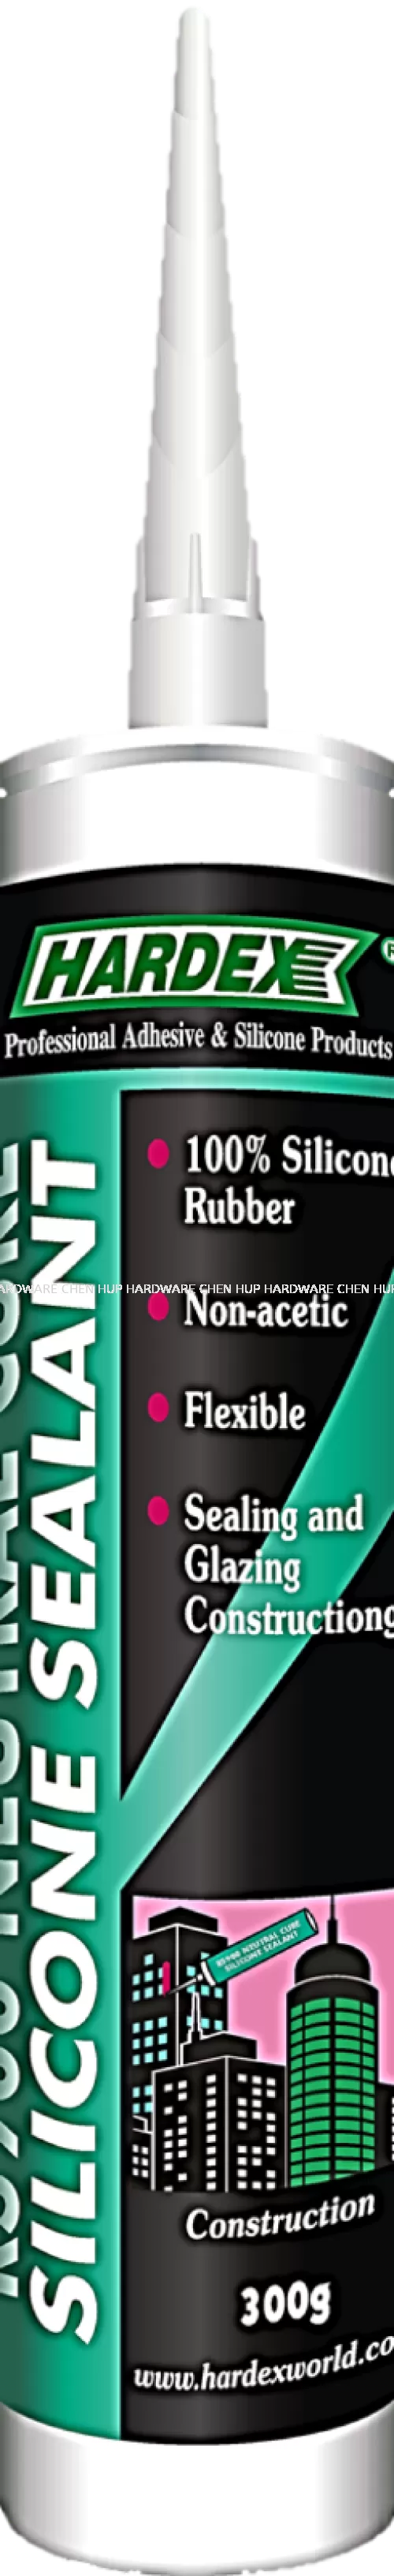 RS 900 Neutral Cure Silicone Sealant